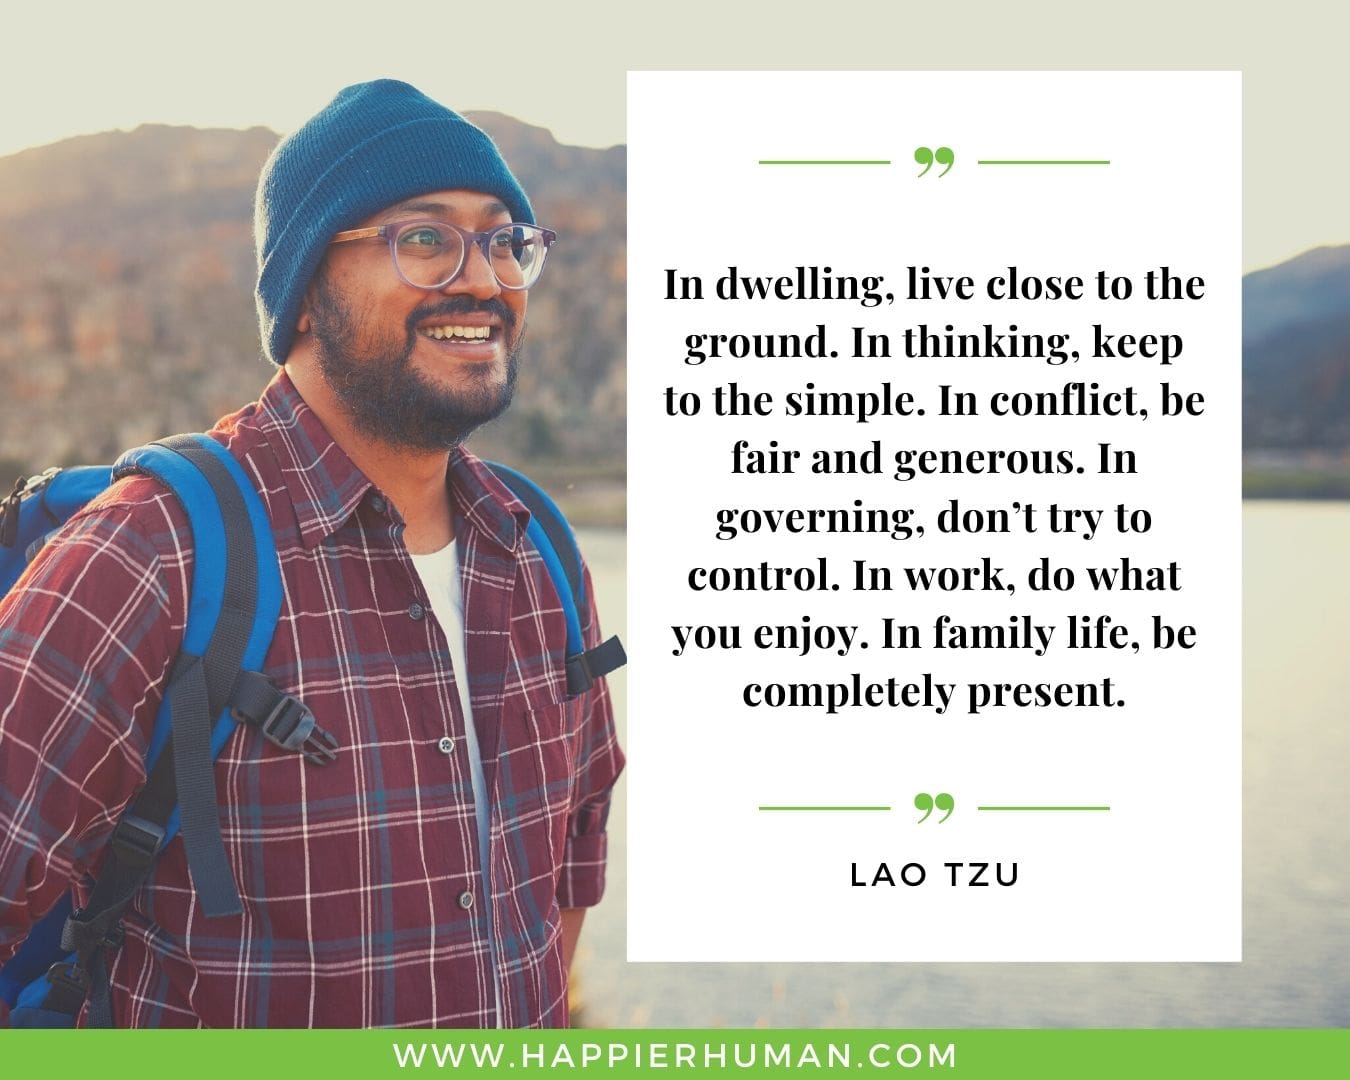 Overthinking Quotes - “In dwelling, live close to the ground. In thinking, keep to the simple. In conflict, be fair and generous. In governing, don’t try to control. In work, do what you enjoy. In family life, be completely present.” - Lao Tzu